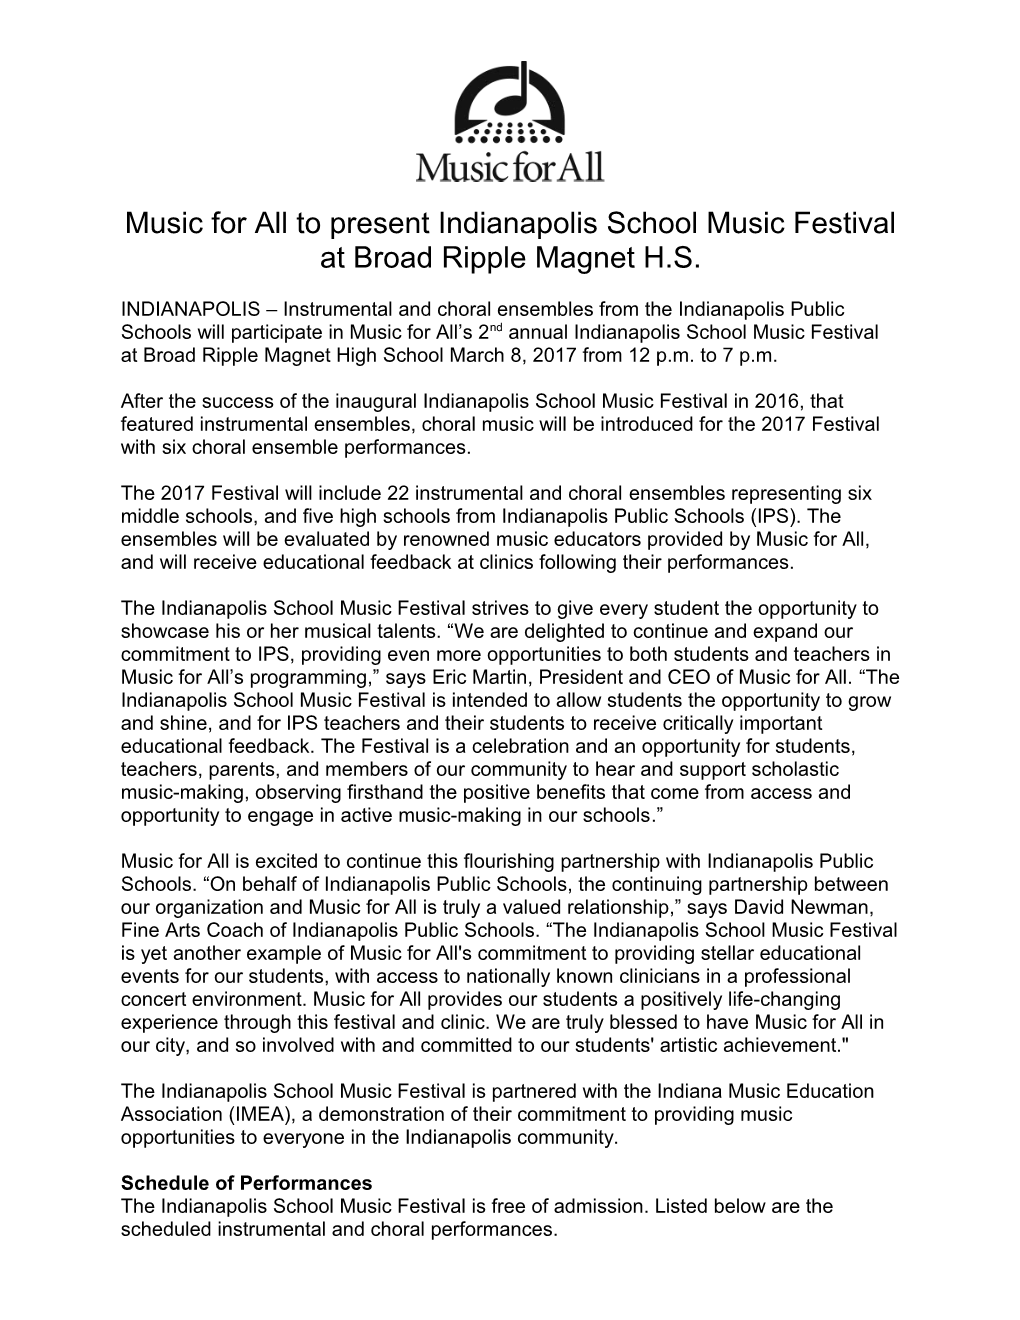 Music for All to Present Indianapolis School Music Festival at Broad Ripple Magnet H.S